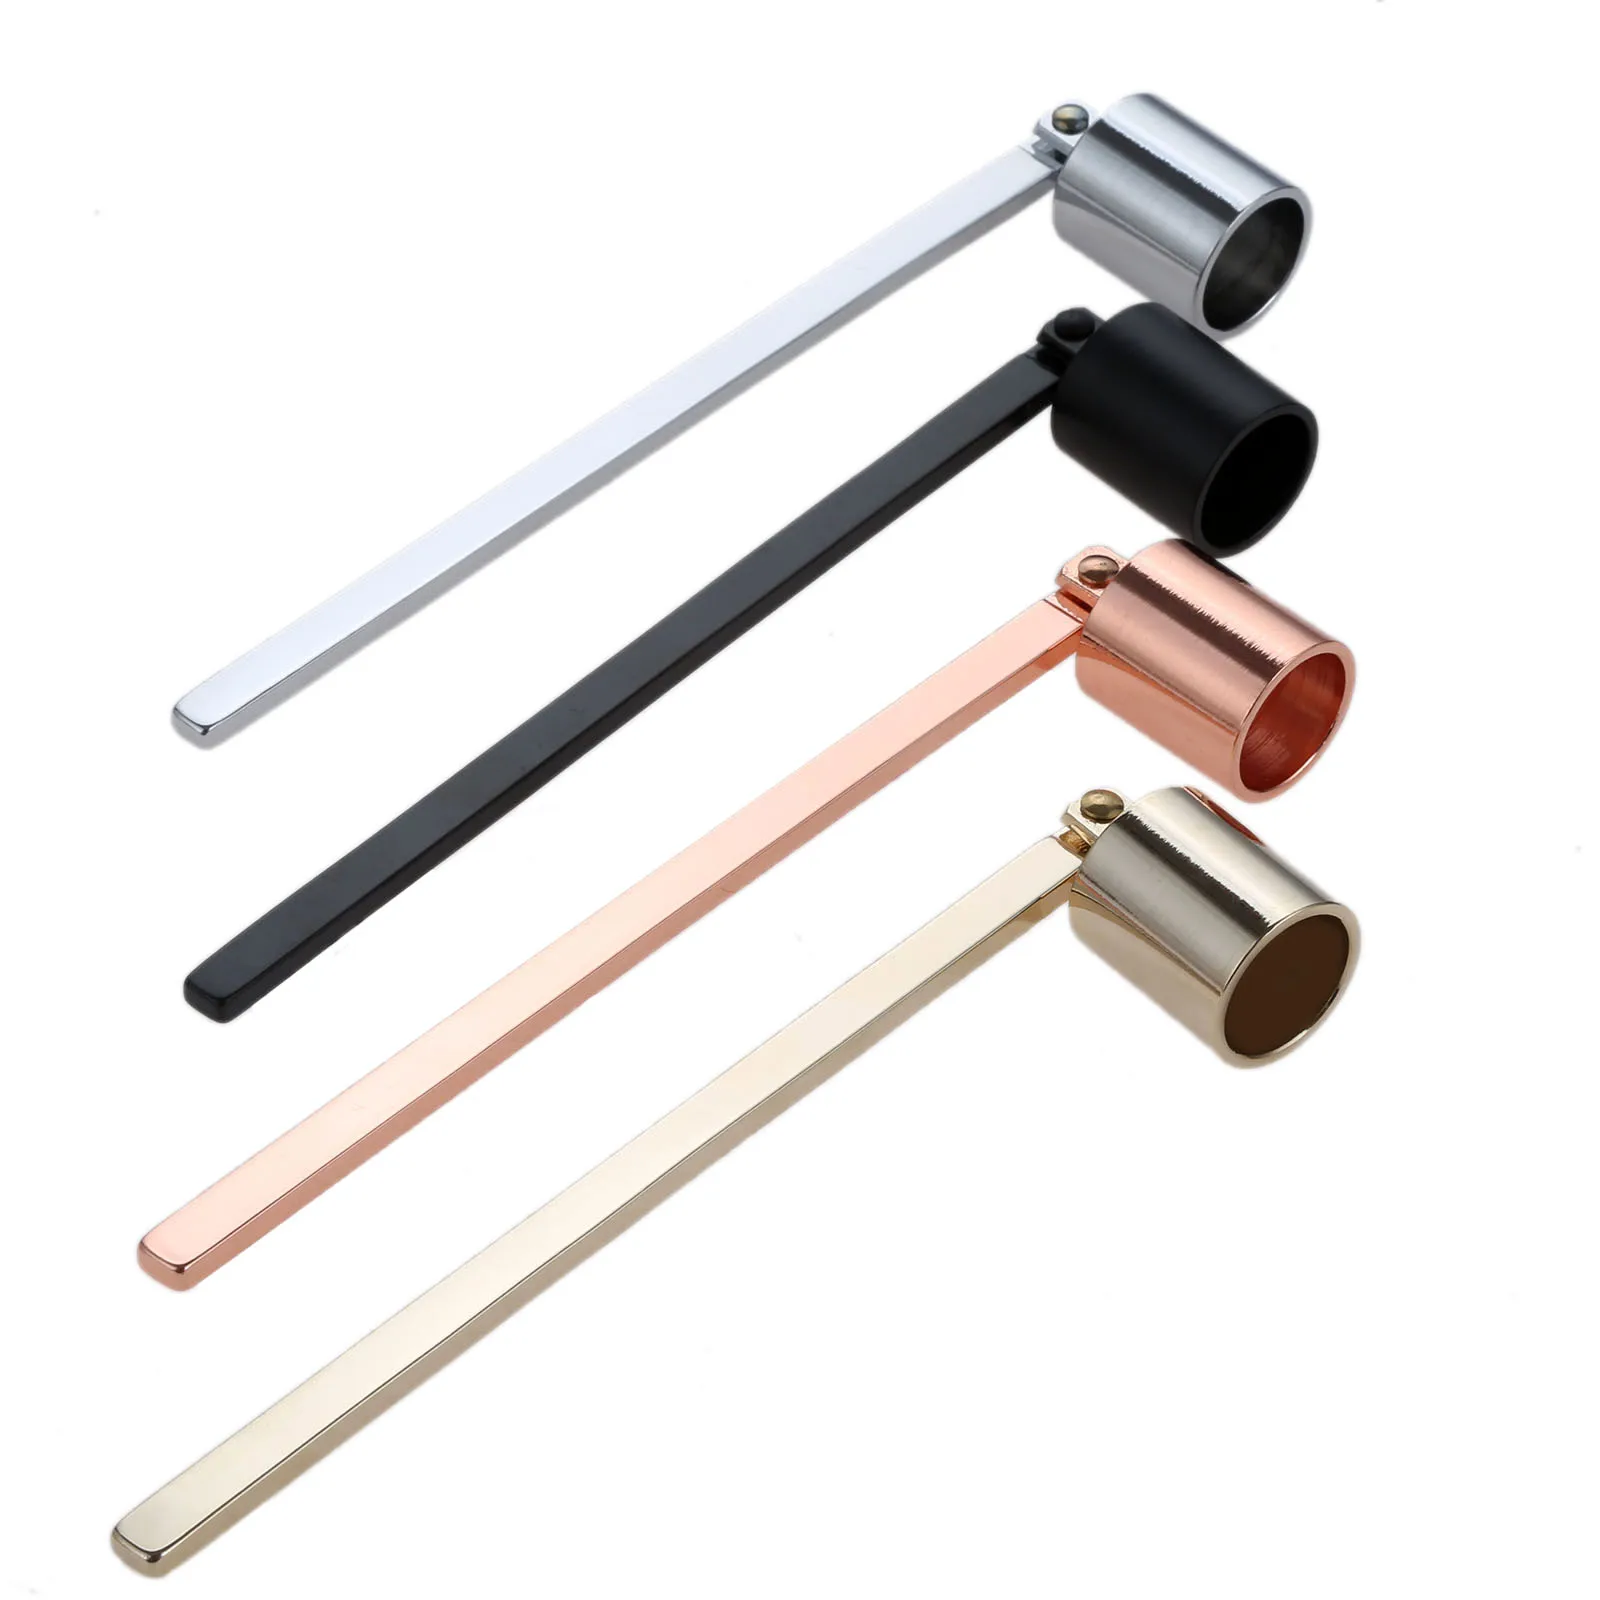 Stainless Steel Candle Snuffer Flame wick tool oil lamp dipper Extinguish Trimmer cutter 19cm put off Rose Gold Black Silve